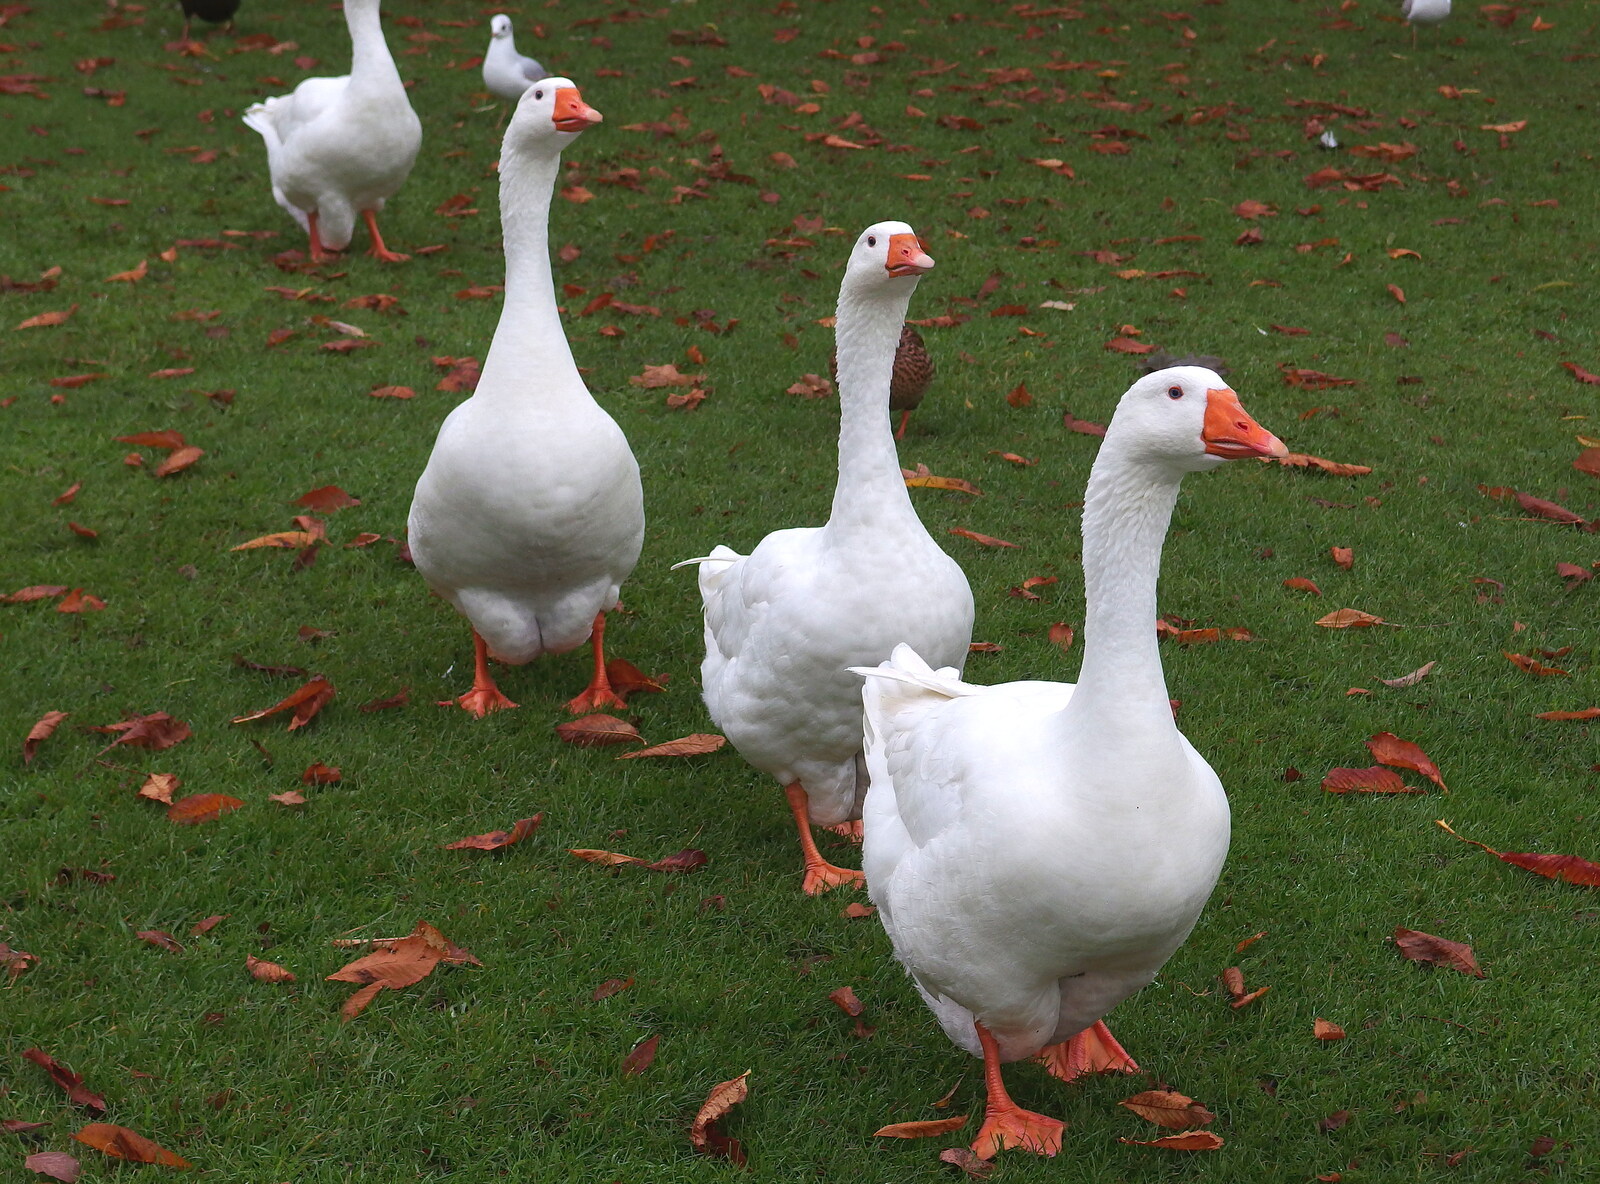 A November Miscellany and Building Progress, Thornham and Brome, Suffolk - 17th November 2013: Some bossy geese roam around in the park